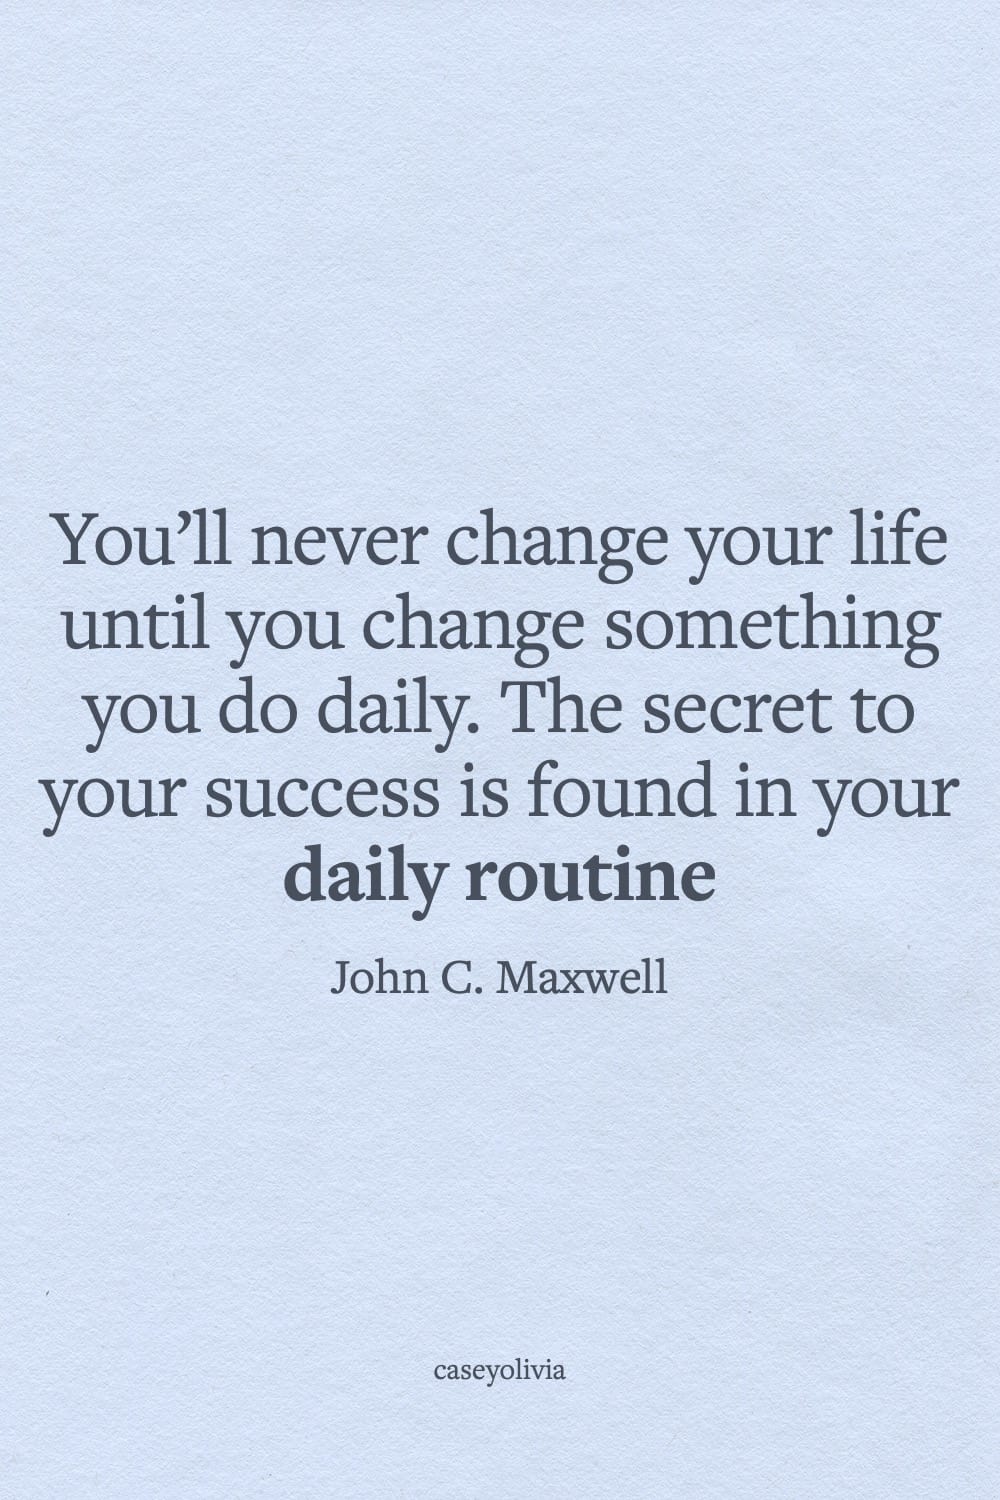 john maxwell famous quote image success in daily routine